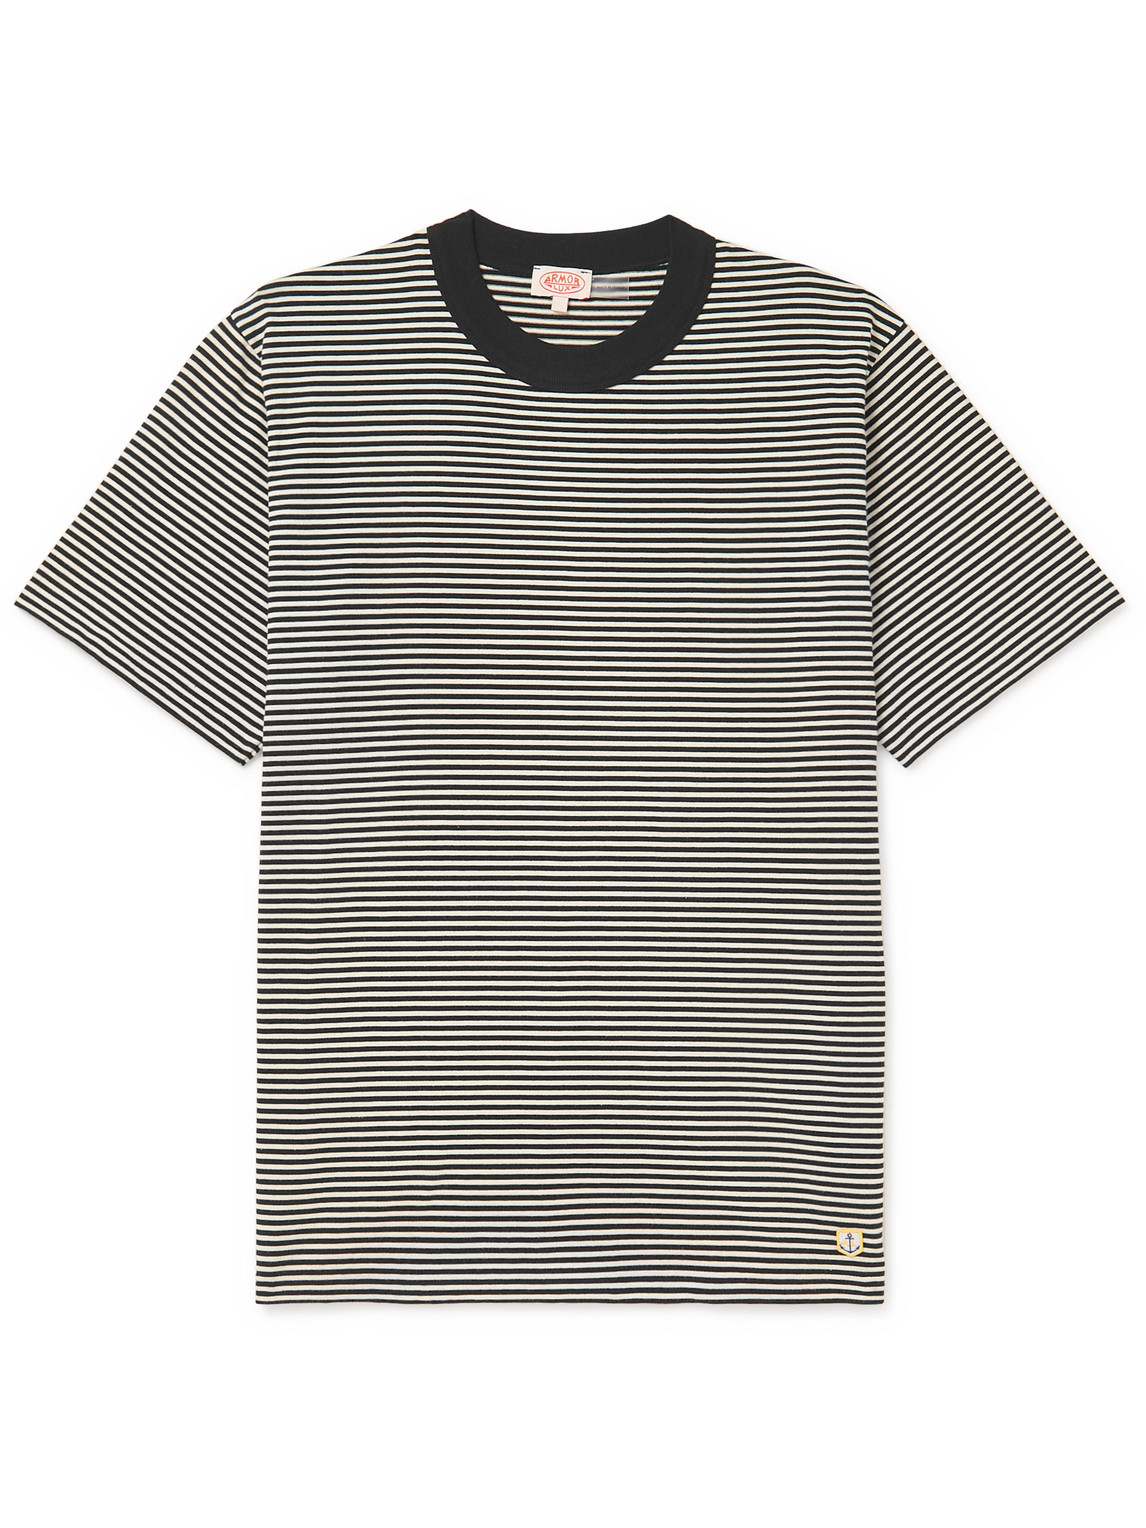 Armor-lux Striped Cotton-jersey T-shirt In Black